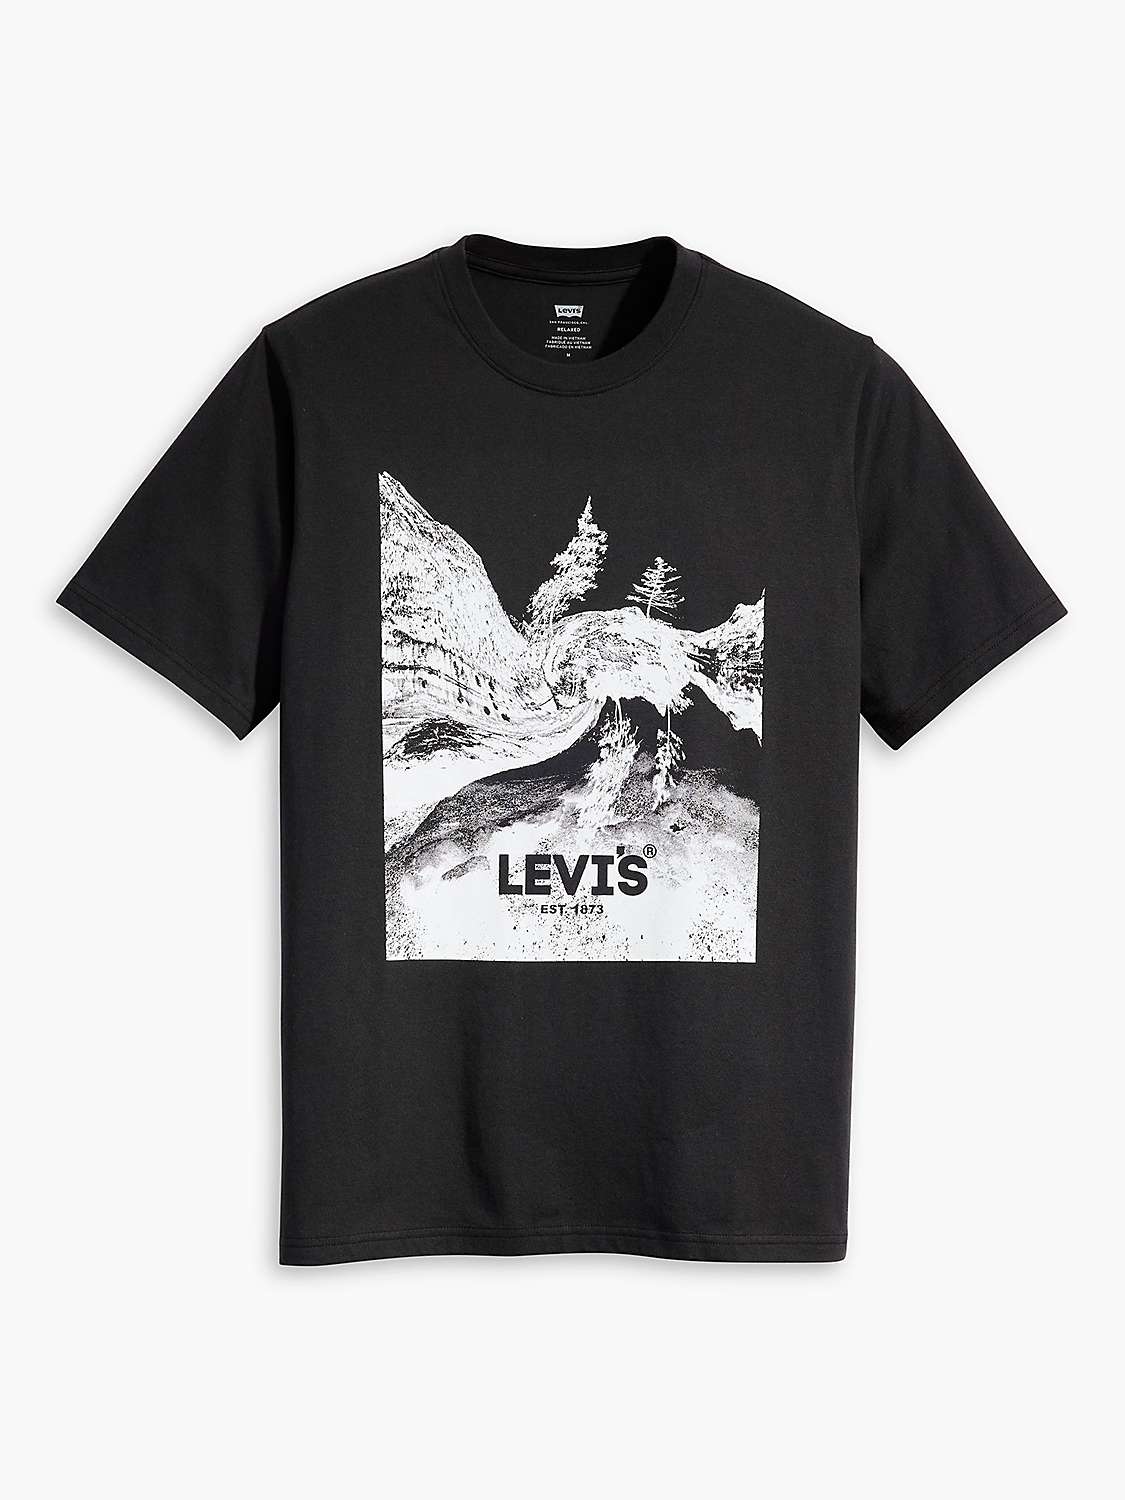 Buy Levi's Short Sleeve Relaxed Graphic T-Shirt, Warped Scenic Caviar Online at johnlewis.com